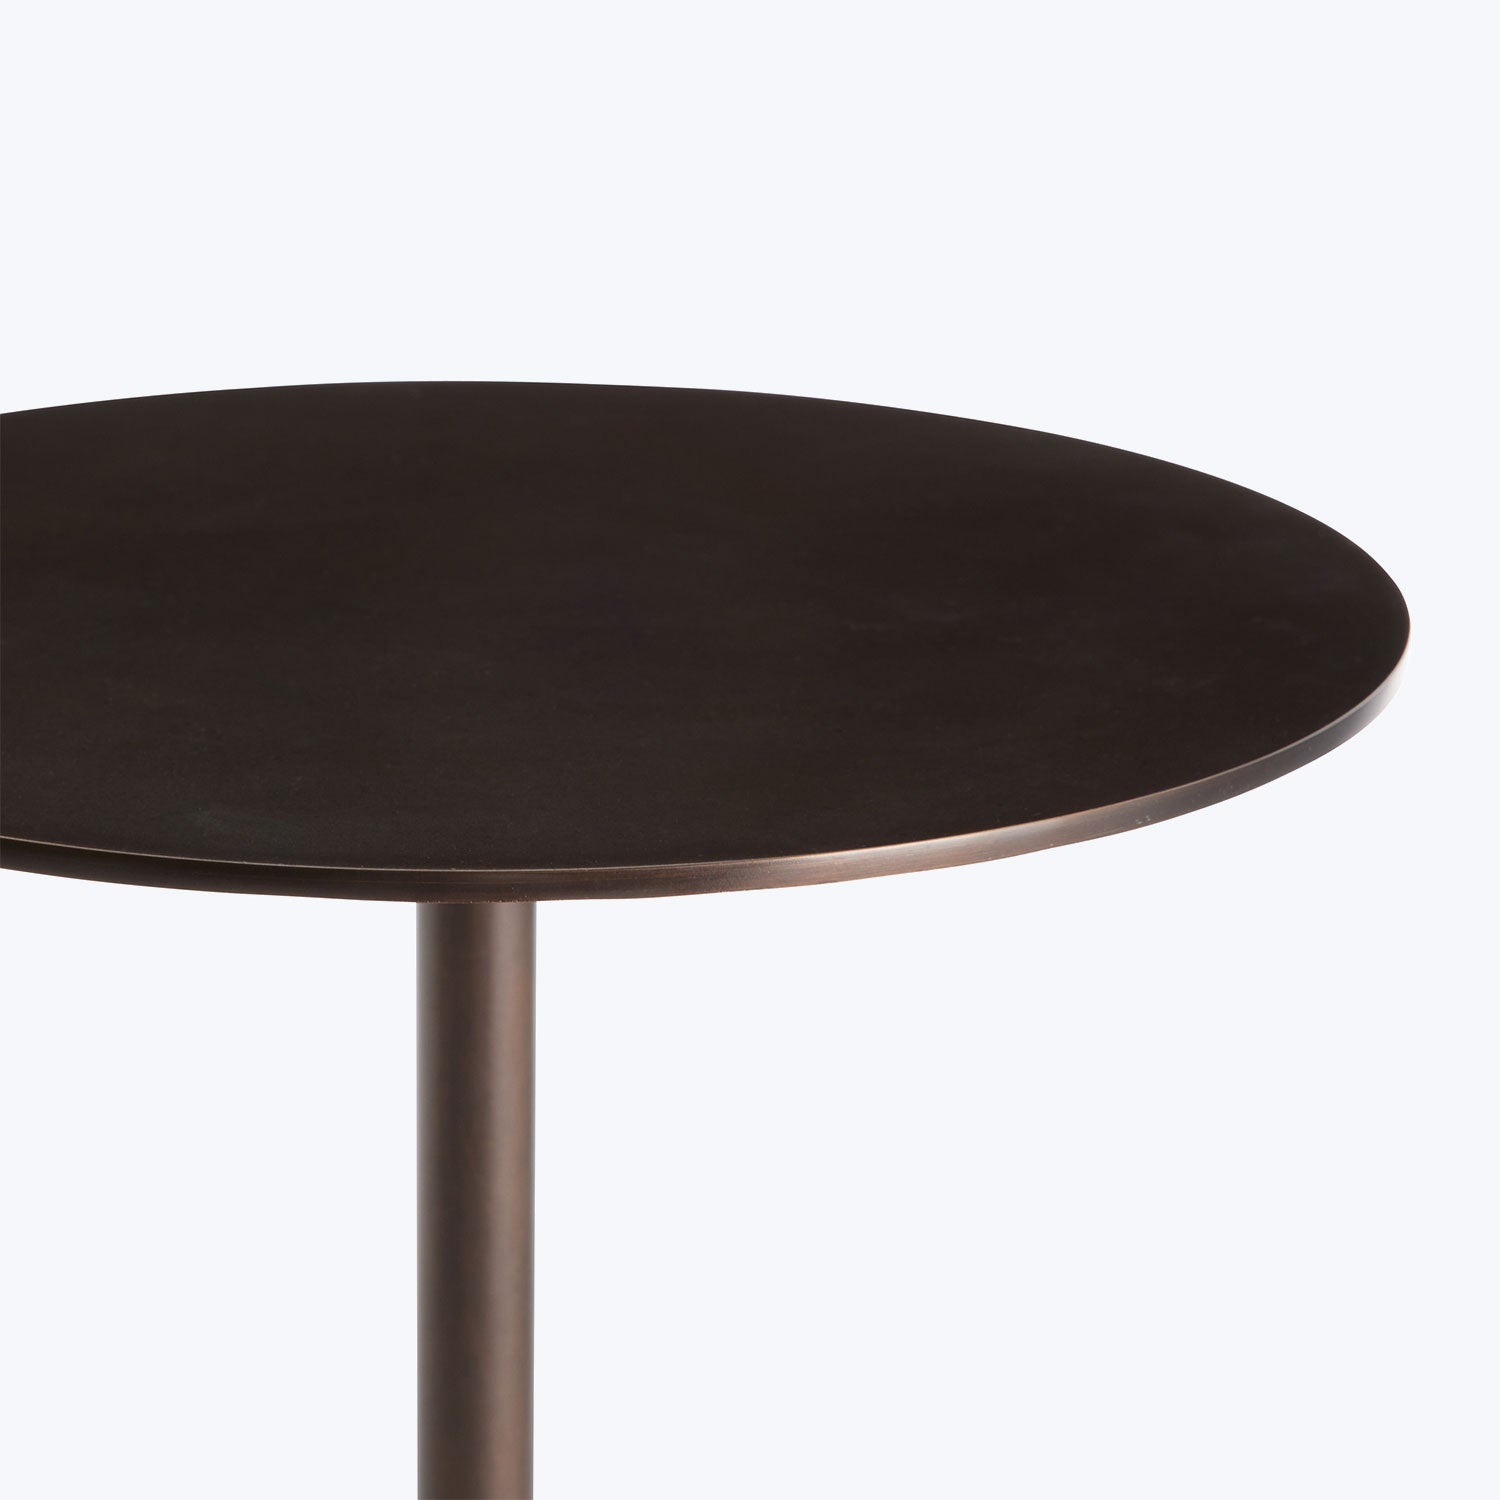 Close-up of a stylish dark circular tabletop with beveled edge.